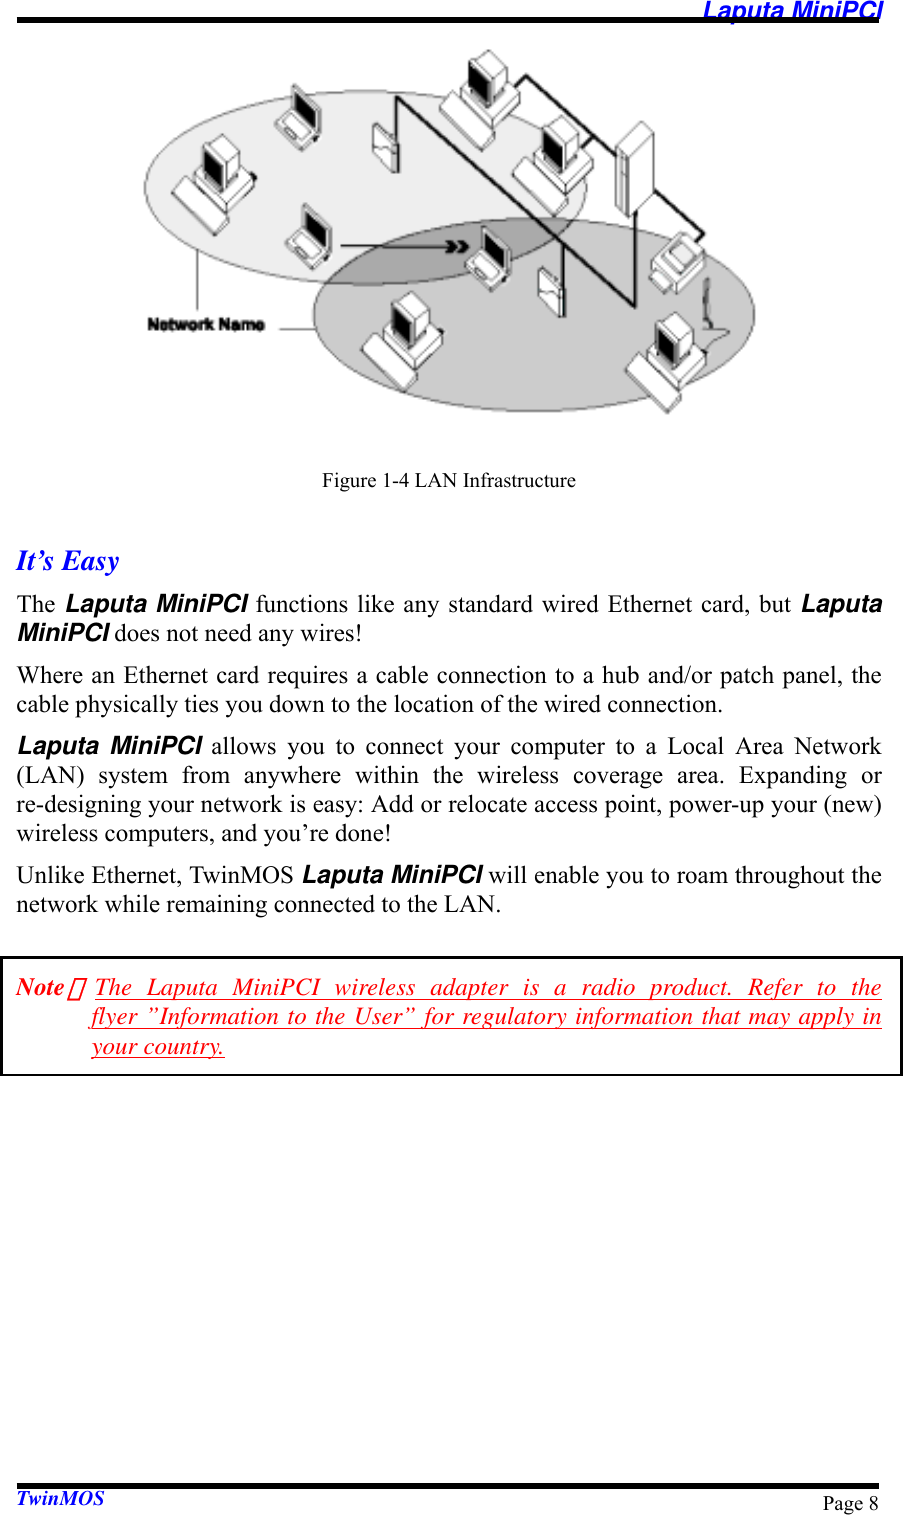   Laputa MiniPCI TwinMOS  Page 8 Figure 1-4 LAN Infrastructure  It’s Easy The Laputa MiniPCI functions like any standard wired Ethernet card, but Laputa MiniPCI does not need any wires! Where an Ethernet card requires a cable connection to a hub and/or patch panel, the cable physically ties you down to the location of the wired connection. Laputa MiniPCI allows you to connect your computer to a Local Area Network (LAN) system from anywhere within the wireless coverage area. Expanding or re-designing your network is easy: Add or relocate access point, power-up your (new) wireless computers, and you’re done! Unlike Ethernet, TwinMOS Laputa MiniPCI will enable you to roam throughout the network while remaining connected to the LAN.  Note：The Laputa MiniPCI wireless adapter is a radio product. Refer to the flyer ”Information to the User” for regulatory information that may apply in your country. 